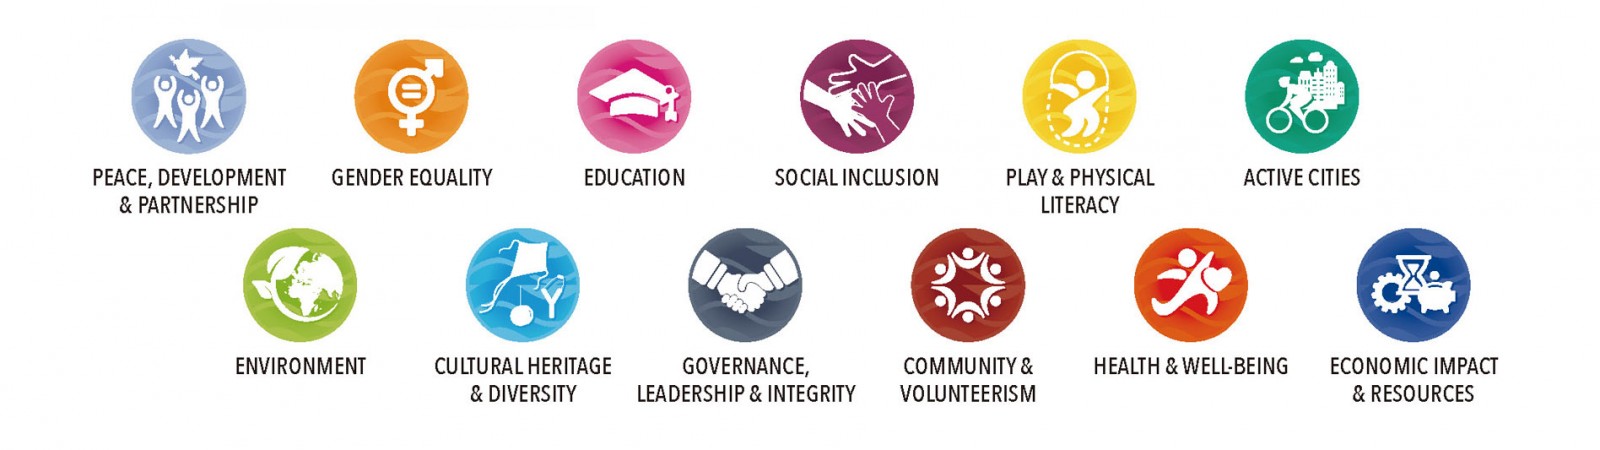 The 12 themes of TAFISA Mission 2030.